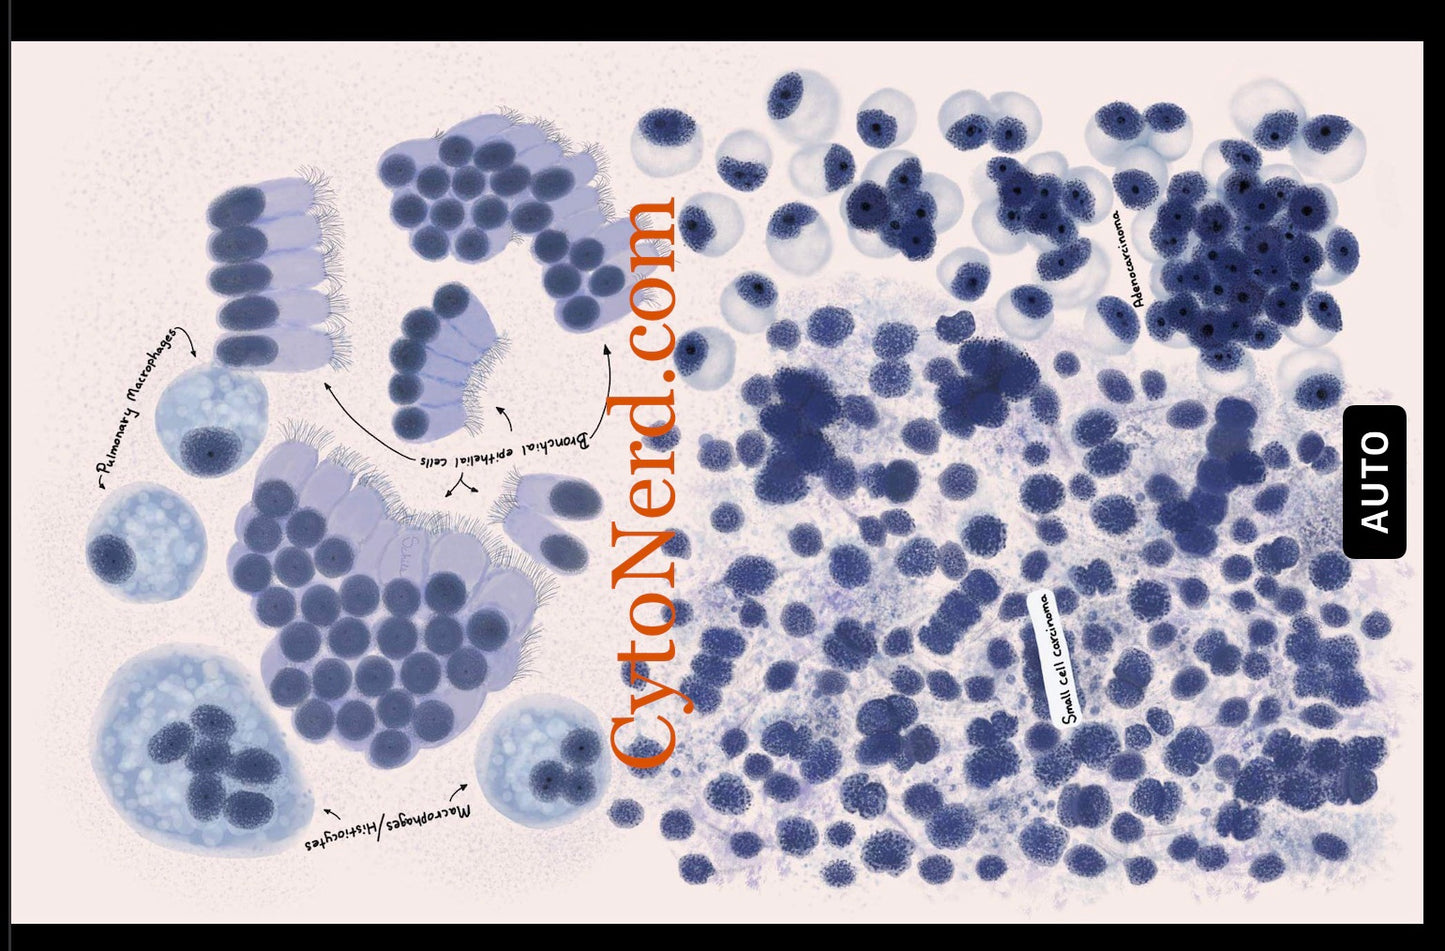 Lung study guide, Adenocarcinoma Cells art, Cytology cells poster small cell carcinoma